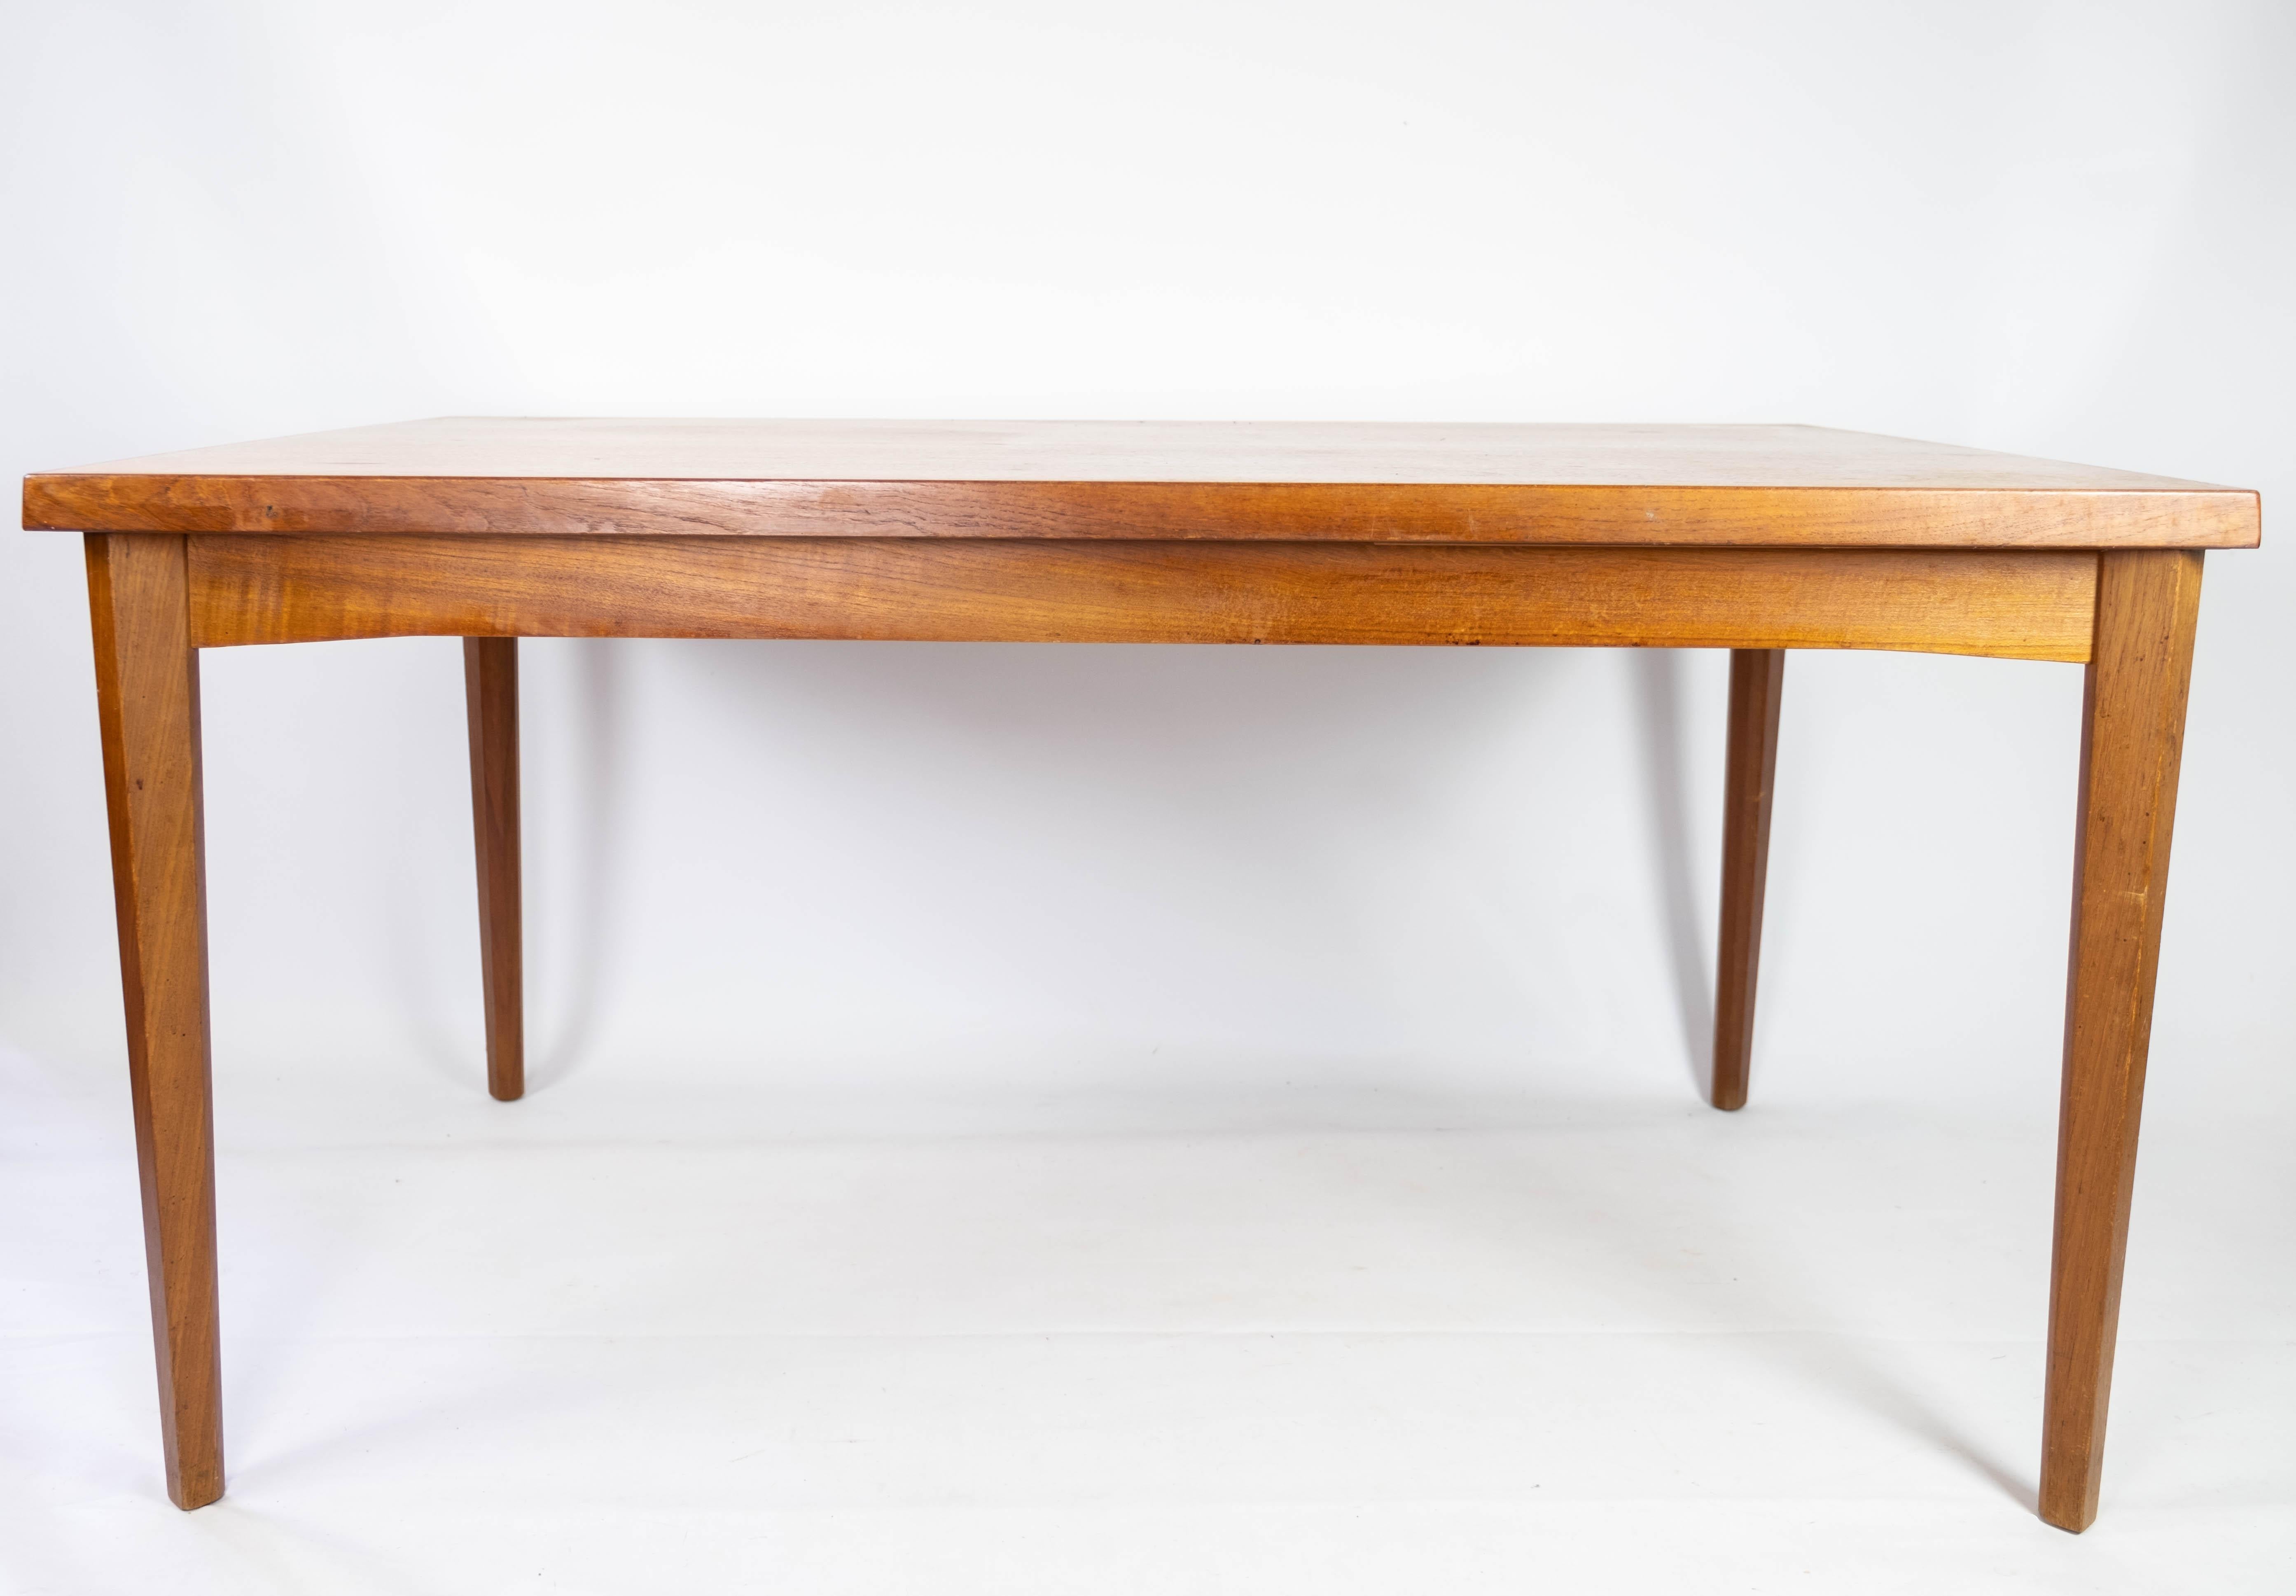 This teak dining table from the 1960s epitomizes Danish design excellence with its blend of functionality and aesthetics. Crafted with quality teak wood, it exudes warmth and durability, characteristic of mid-century Scandinavian furniture.

The